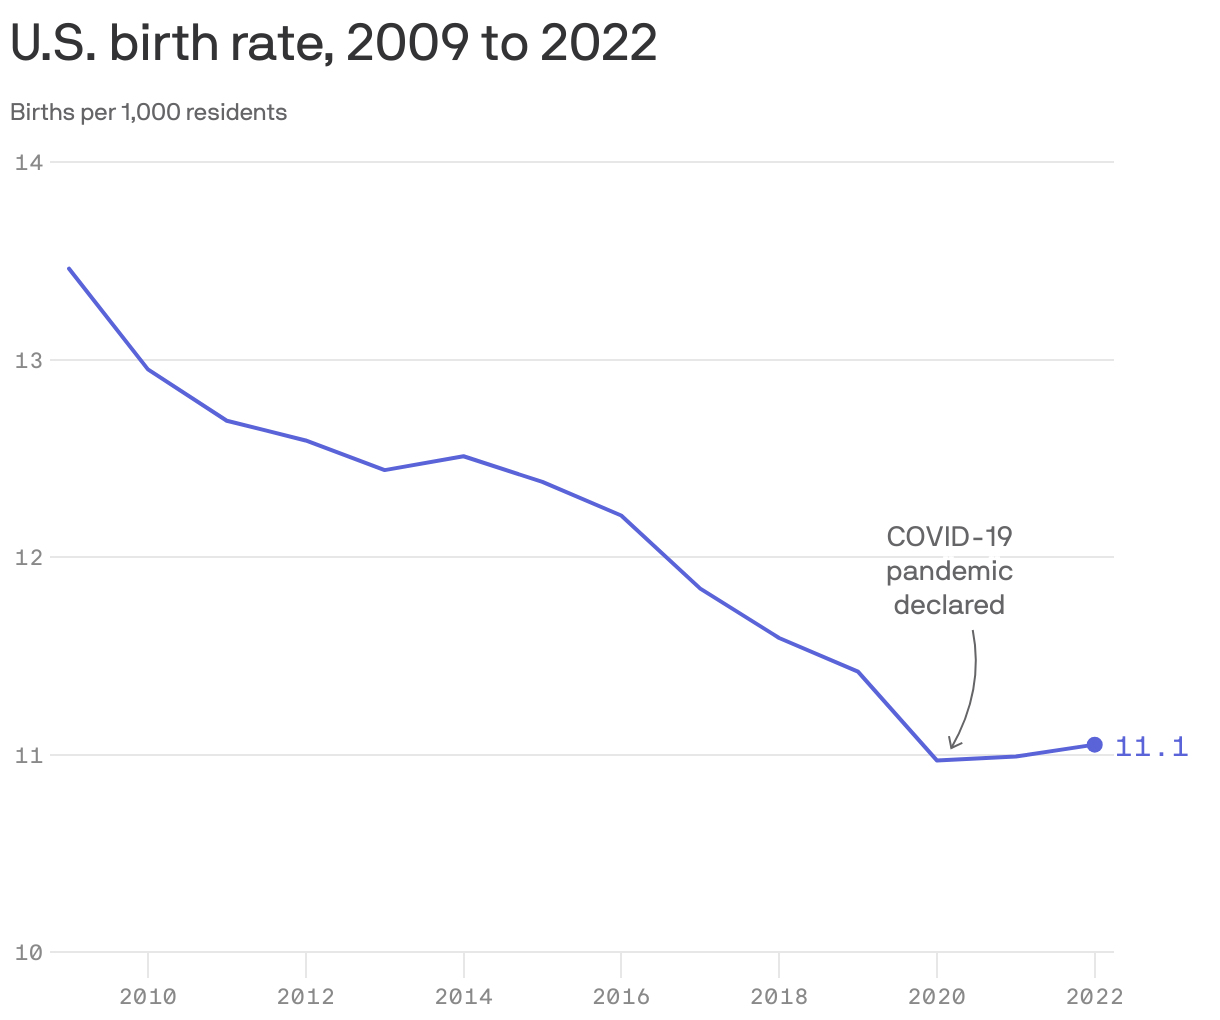 U.S. birth rate, 2009 to 2022